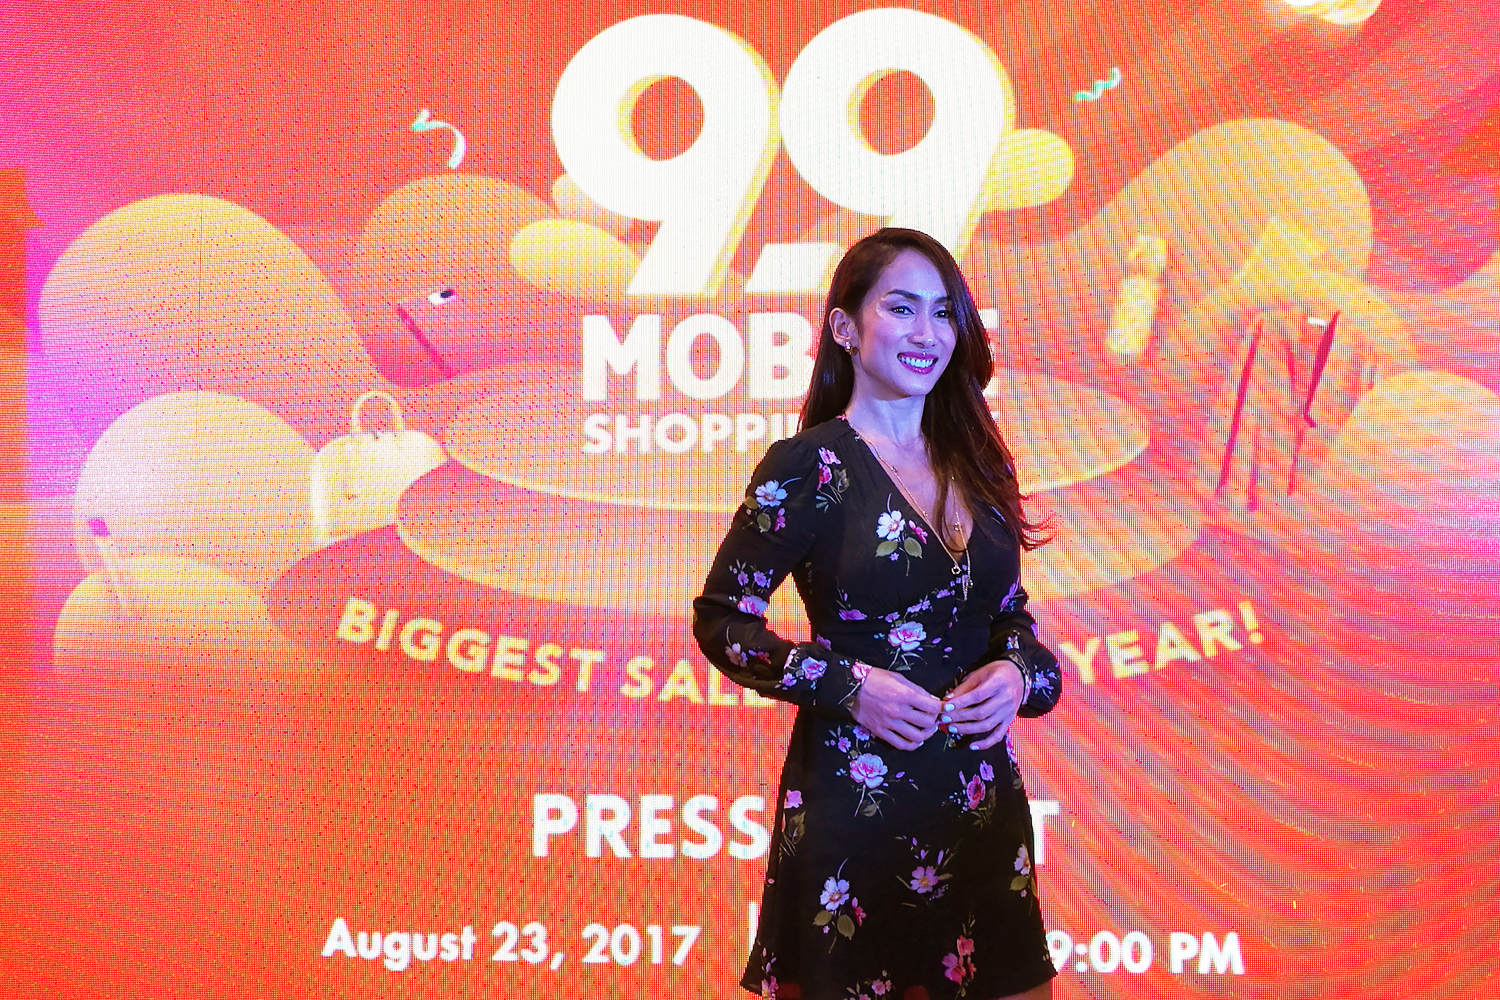 Shopee 9.9 Mobile Shopping Day